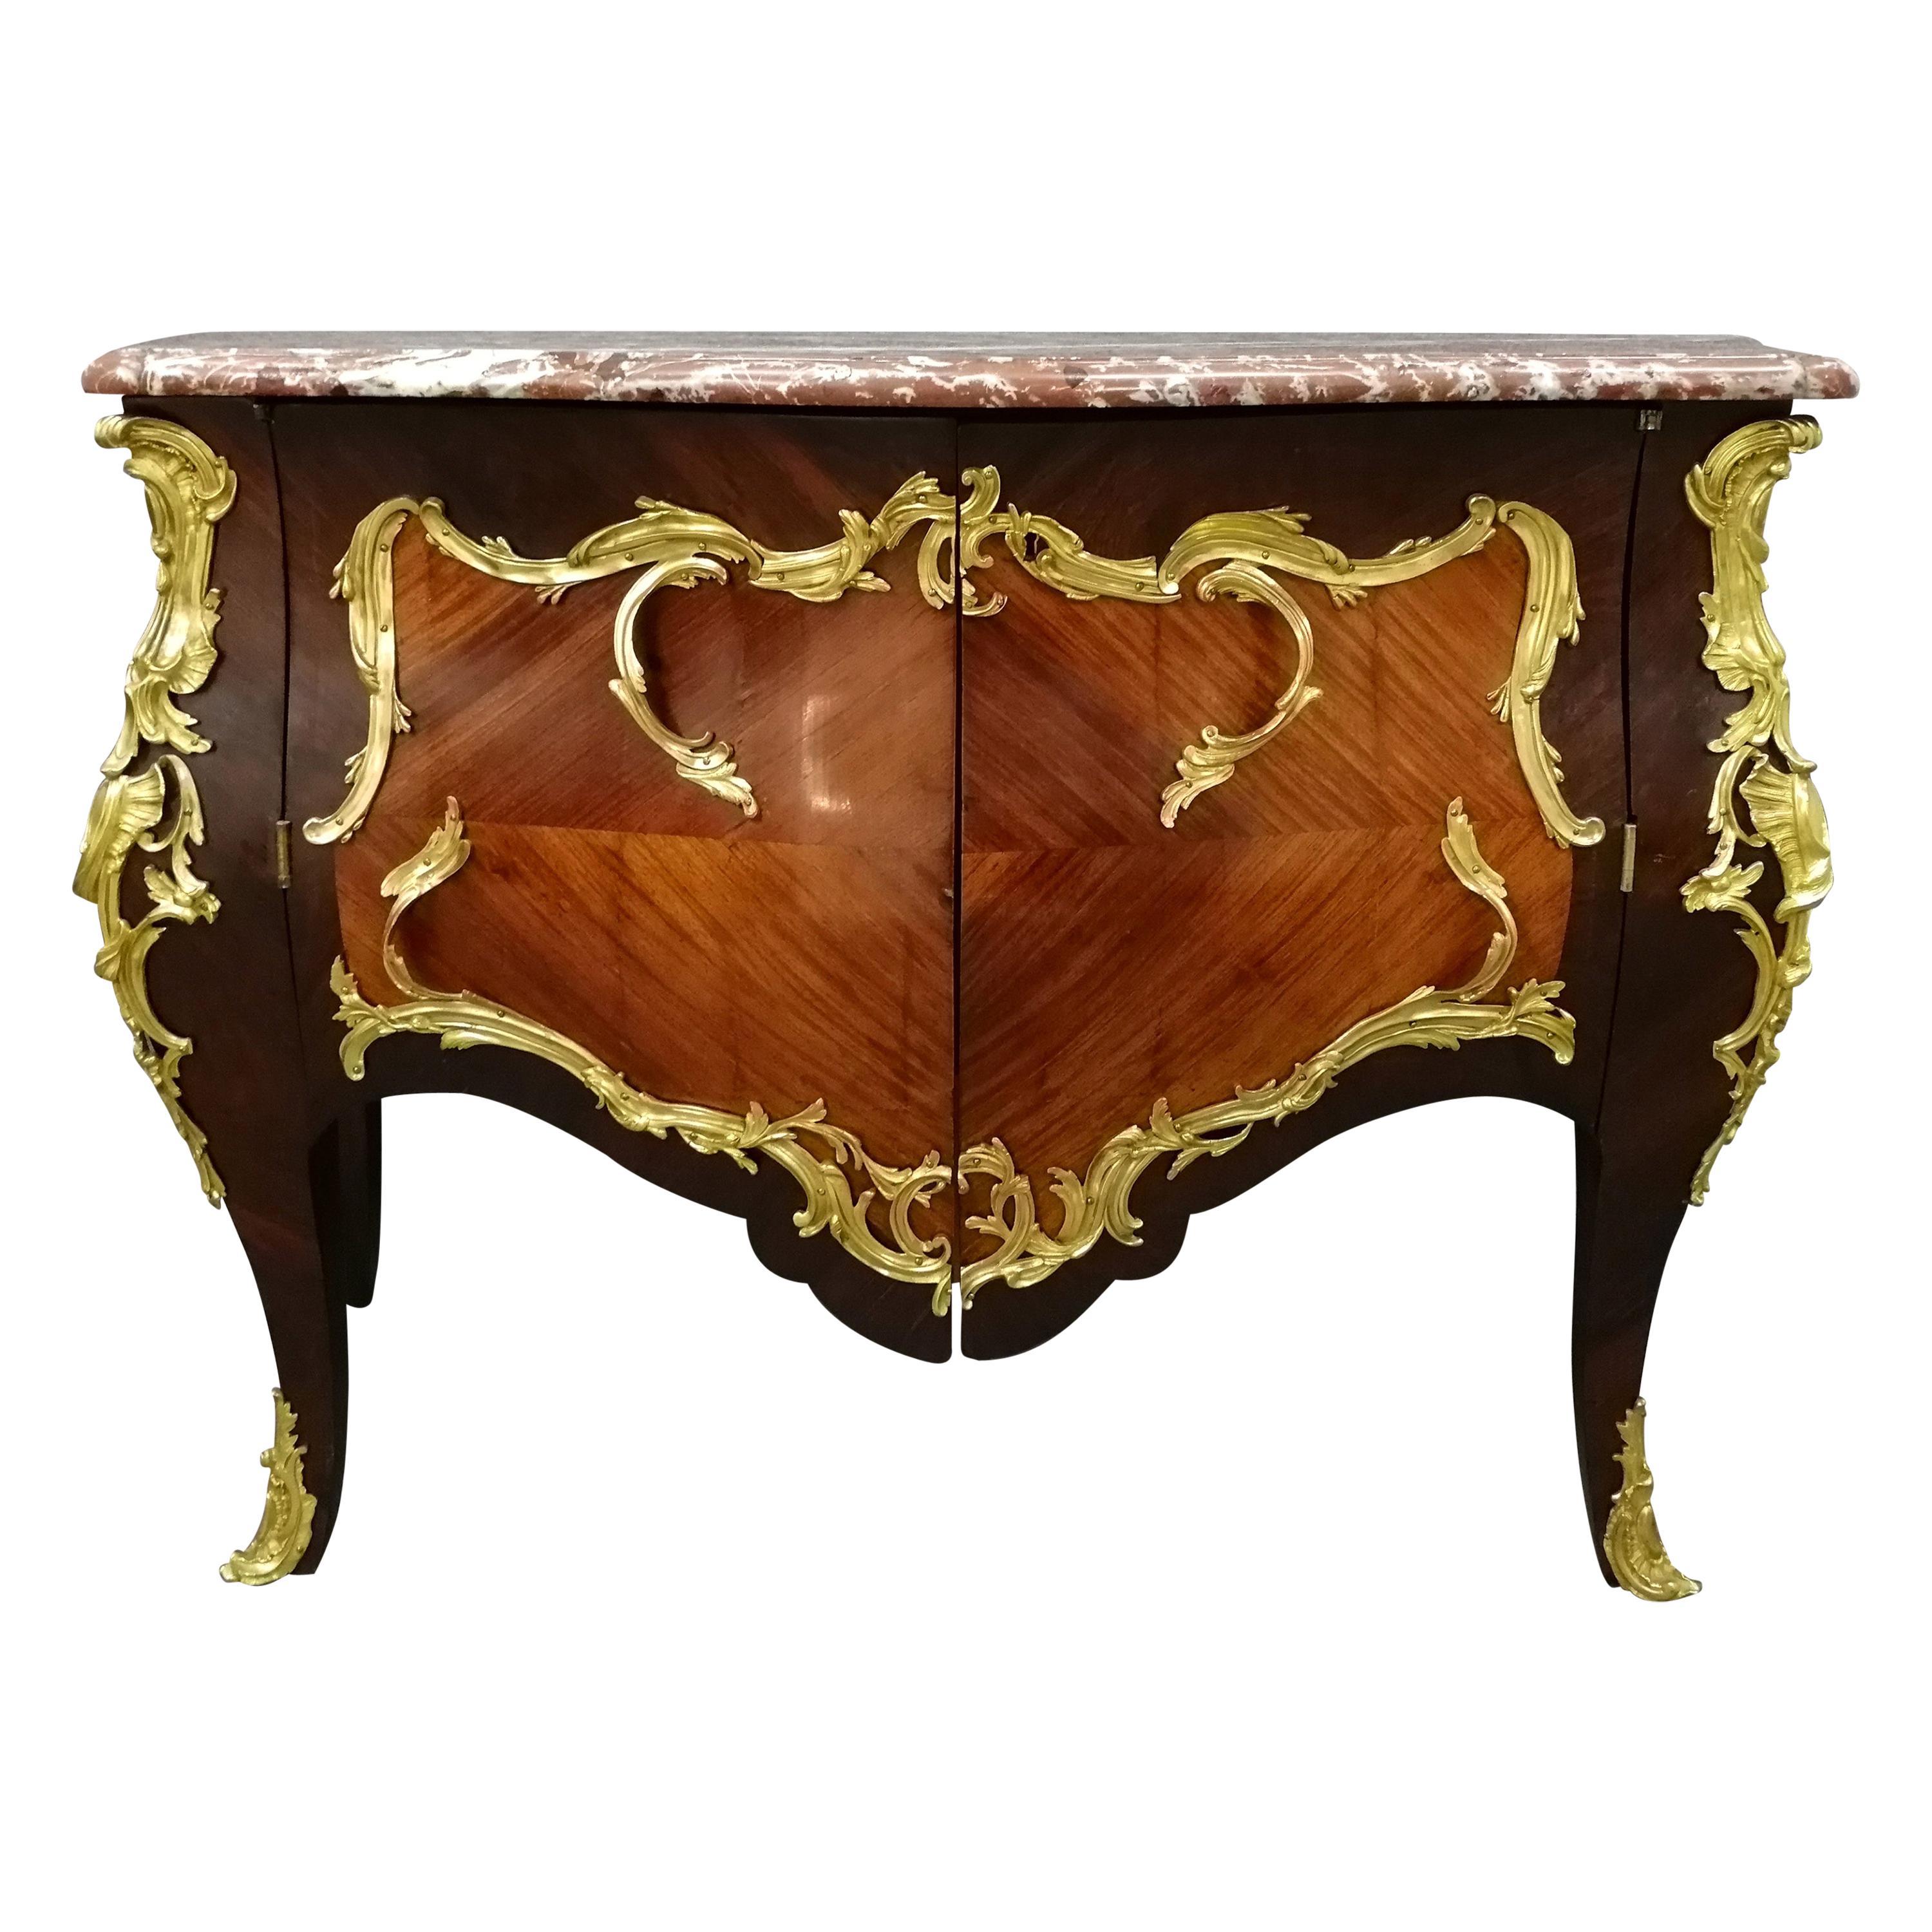 Antique French Commode Louis XVI Attributed Jean Pierre Latz, 18th Century